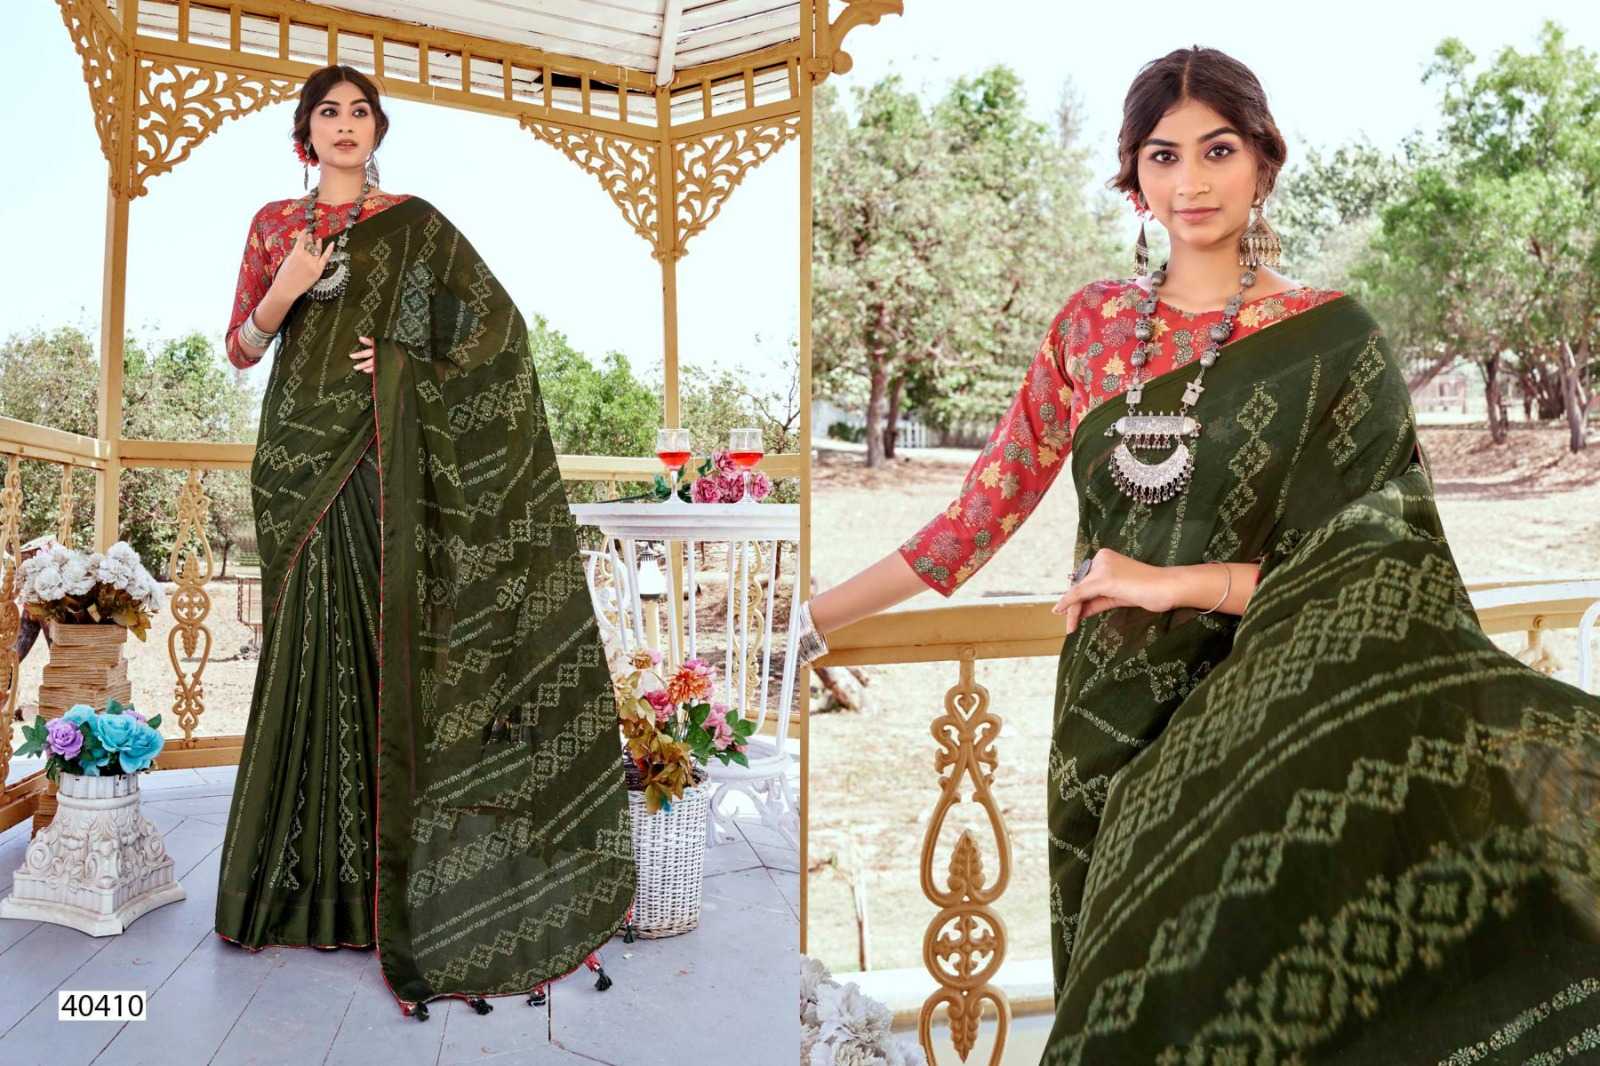 DREAMGIRL BY 5D DESIGNER 40407-40414 ETHNIC STYLE SOFT DIAMOND SILK SAREE WITH BLOUSE